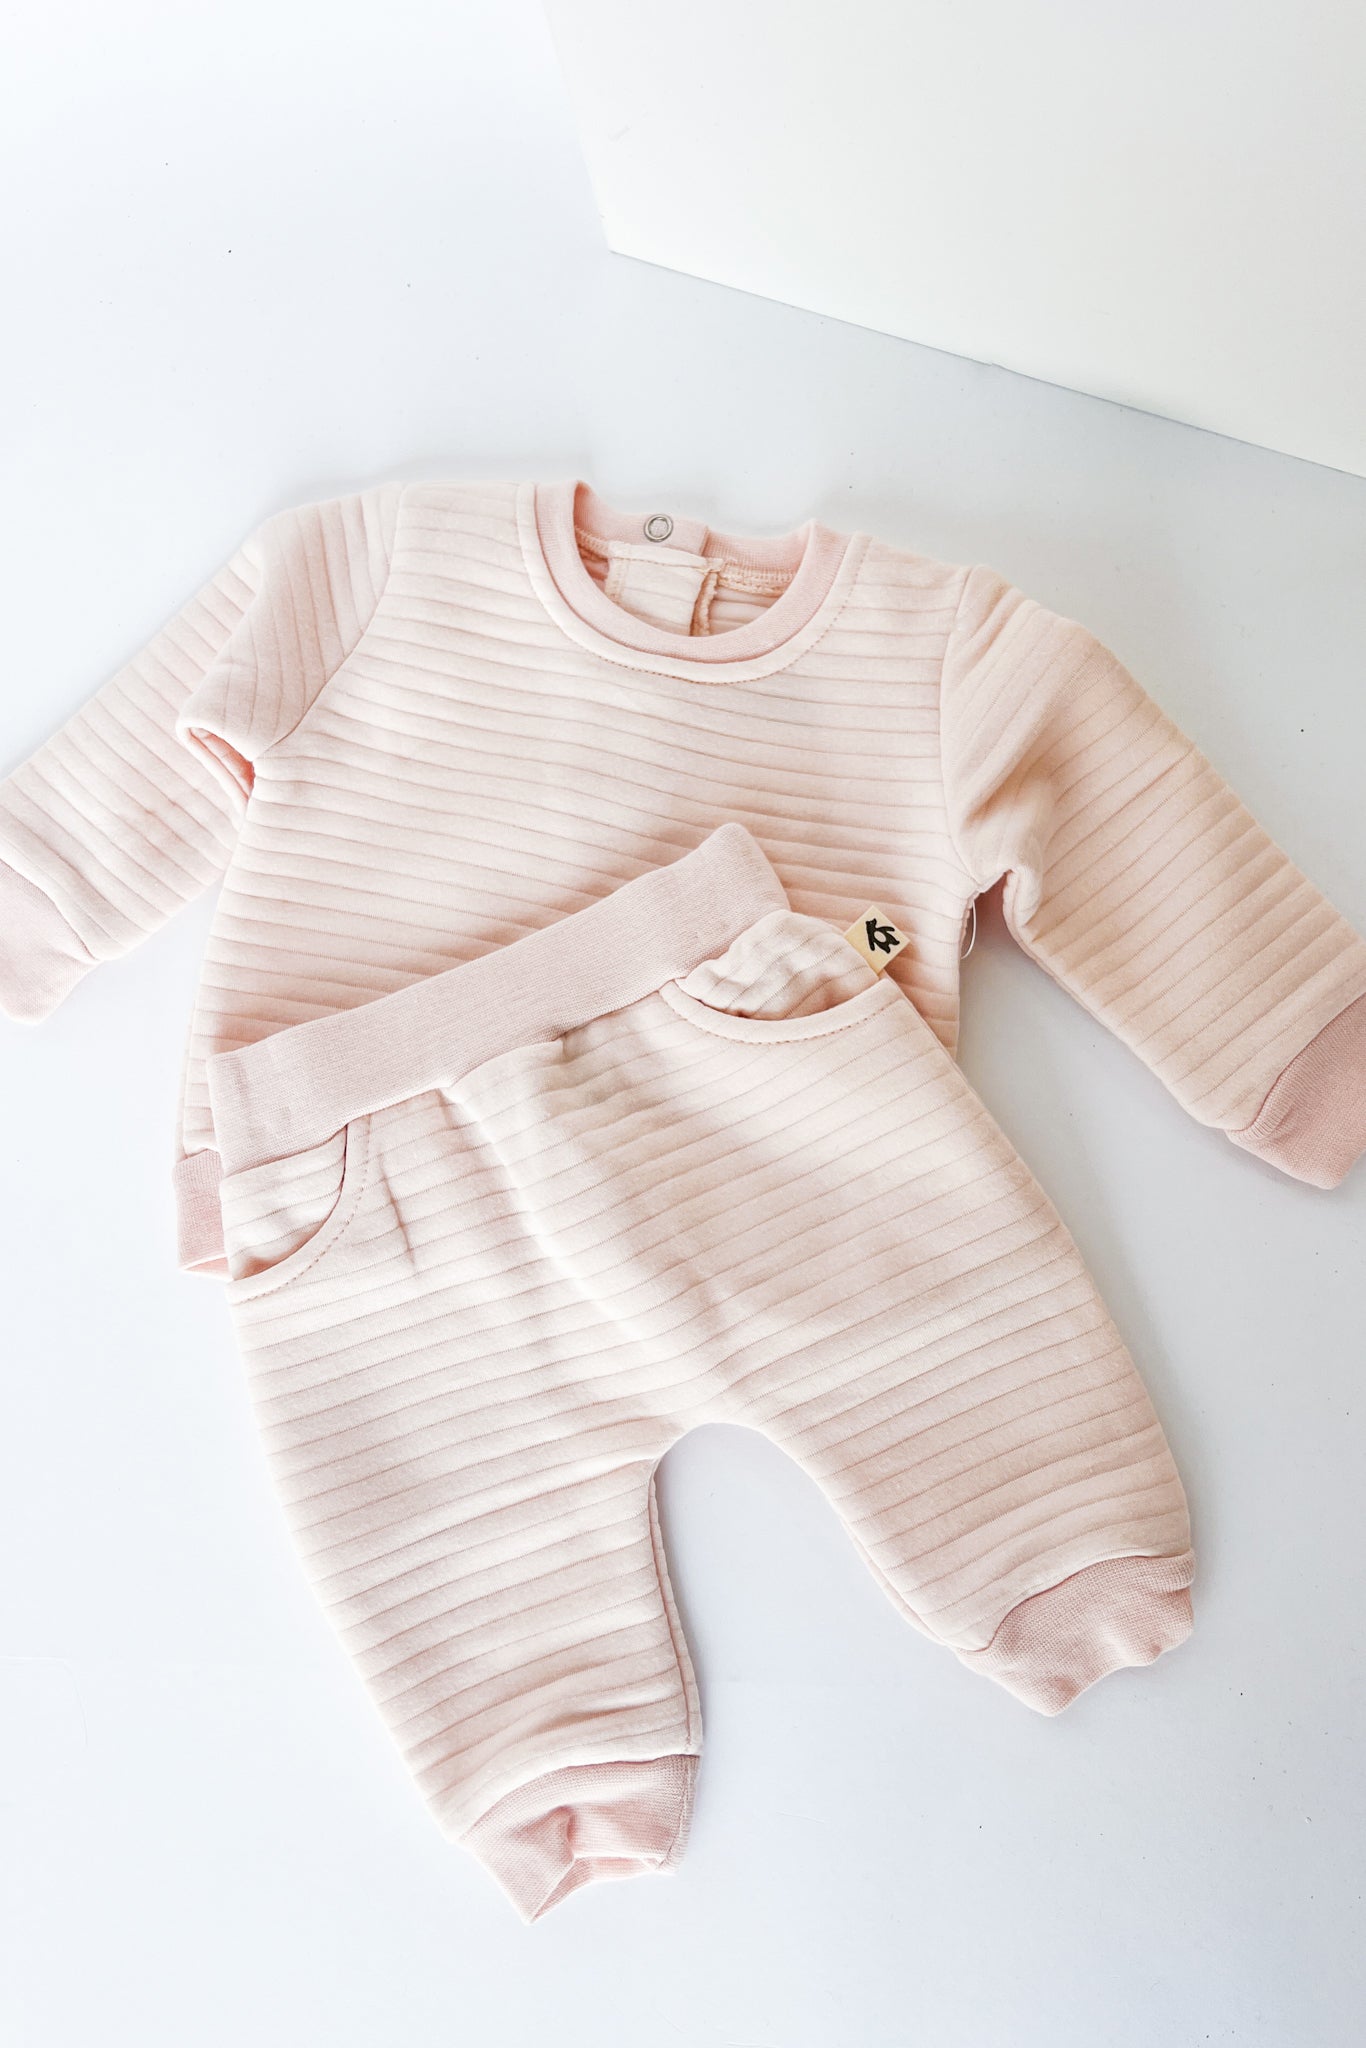 Snugabye Dream Baby Quilted Set - Pink